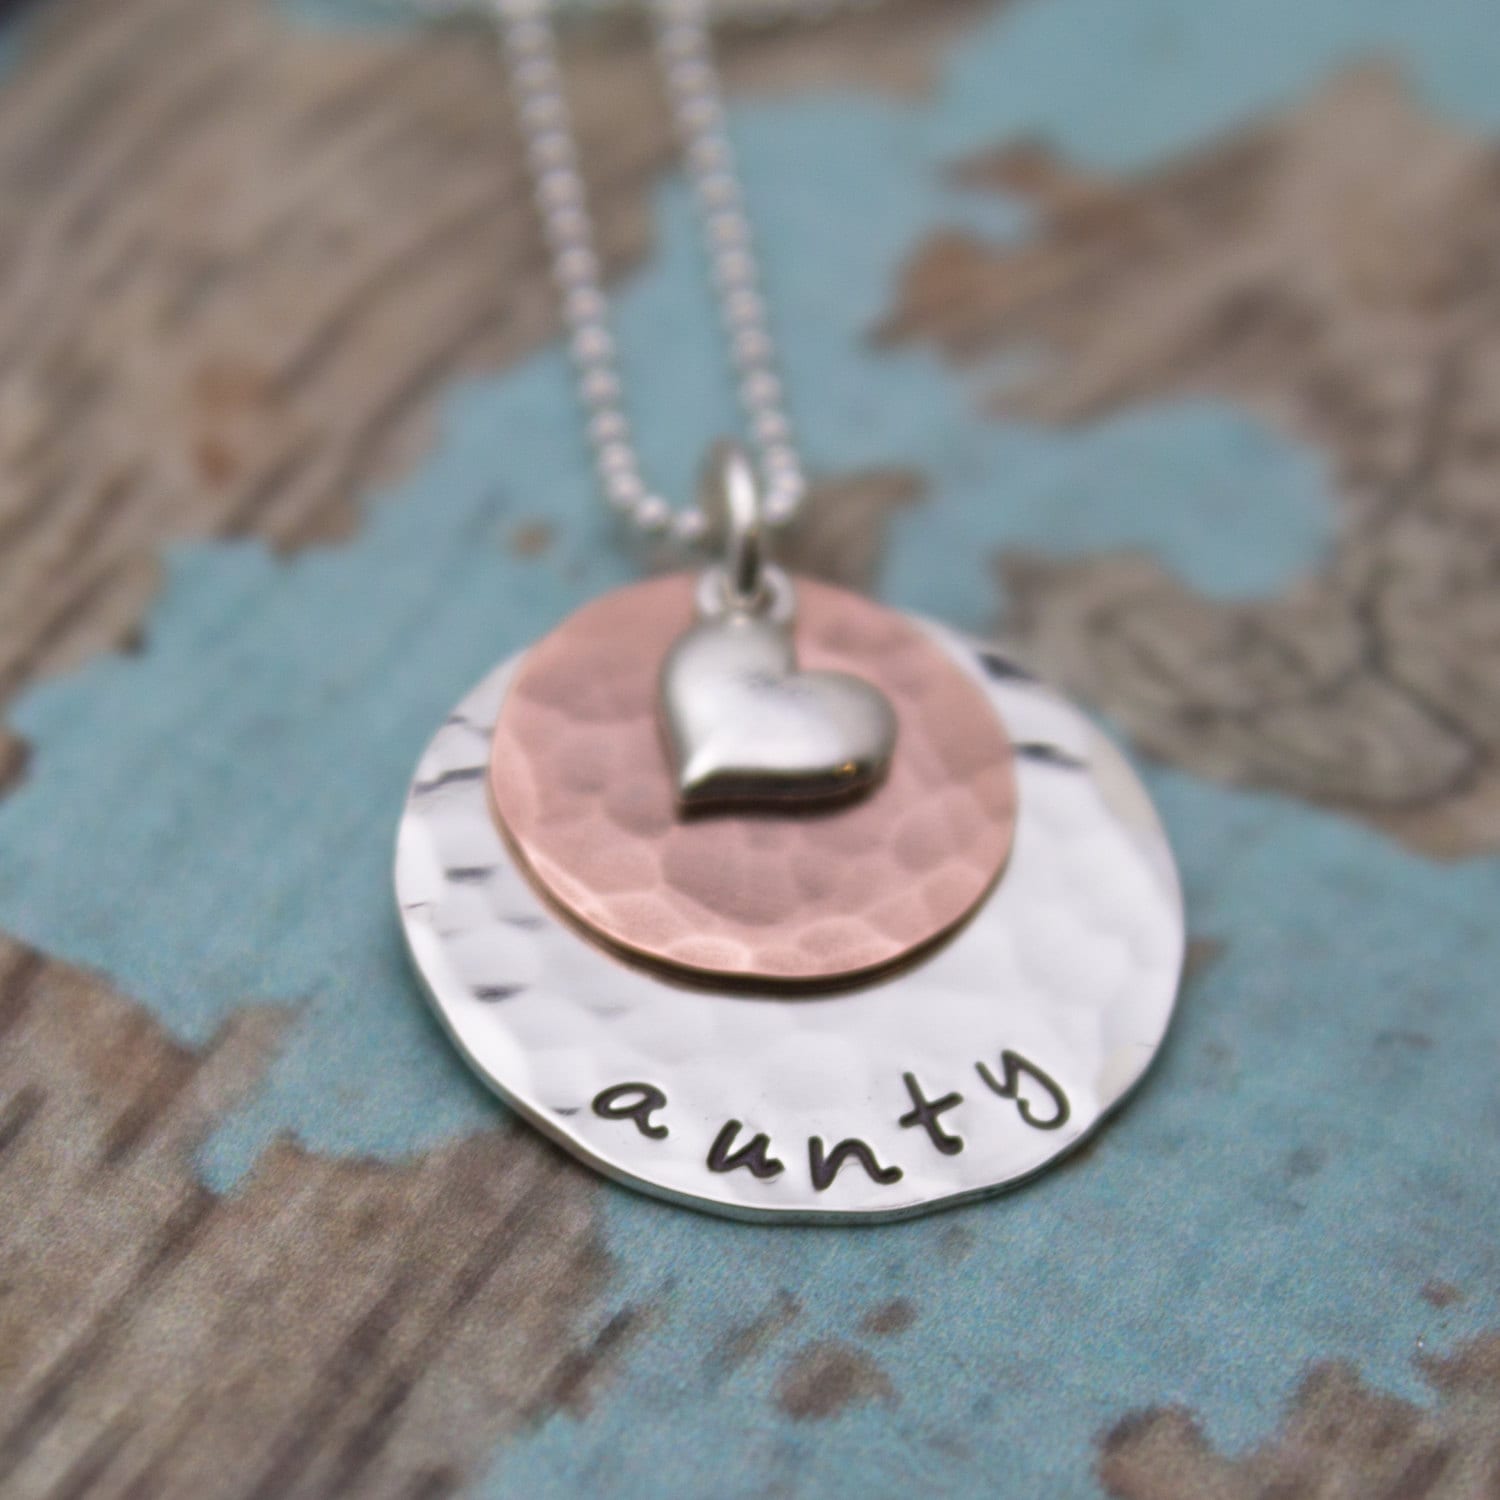 Sterling Silver and Copper Layered Necklace with Heart Charm Grandmother or Mother Necklace Personalized Hand Stamped Jewelry